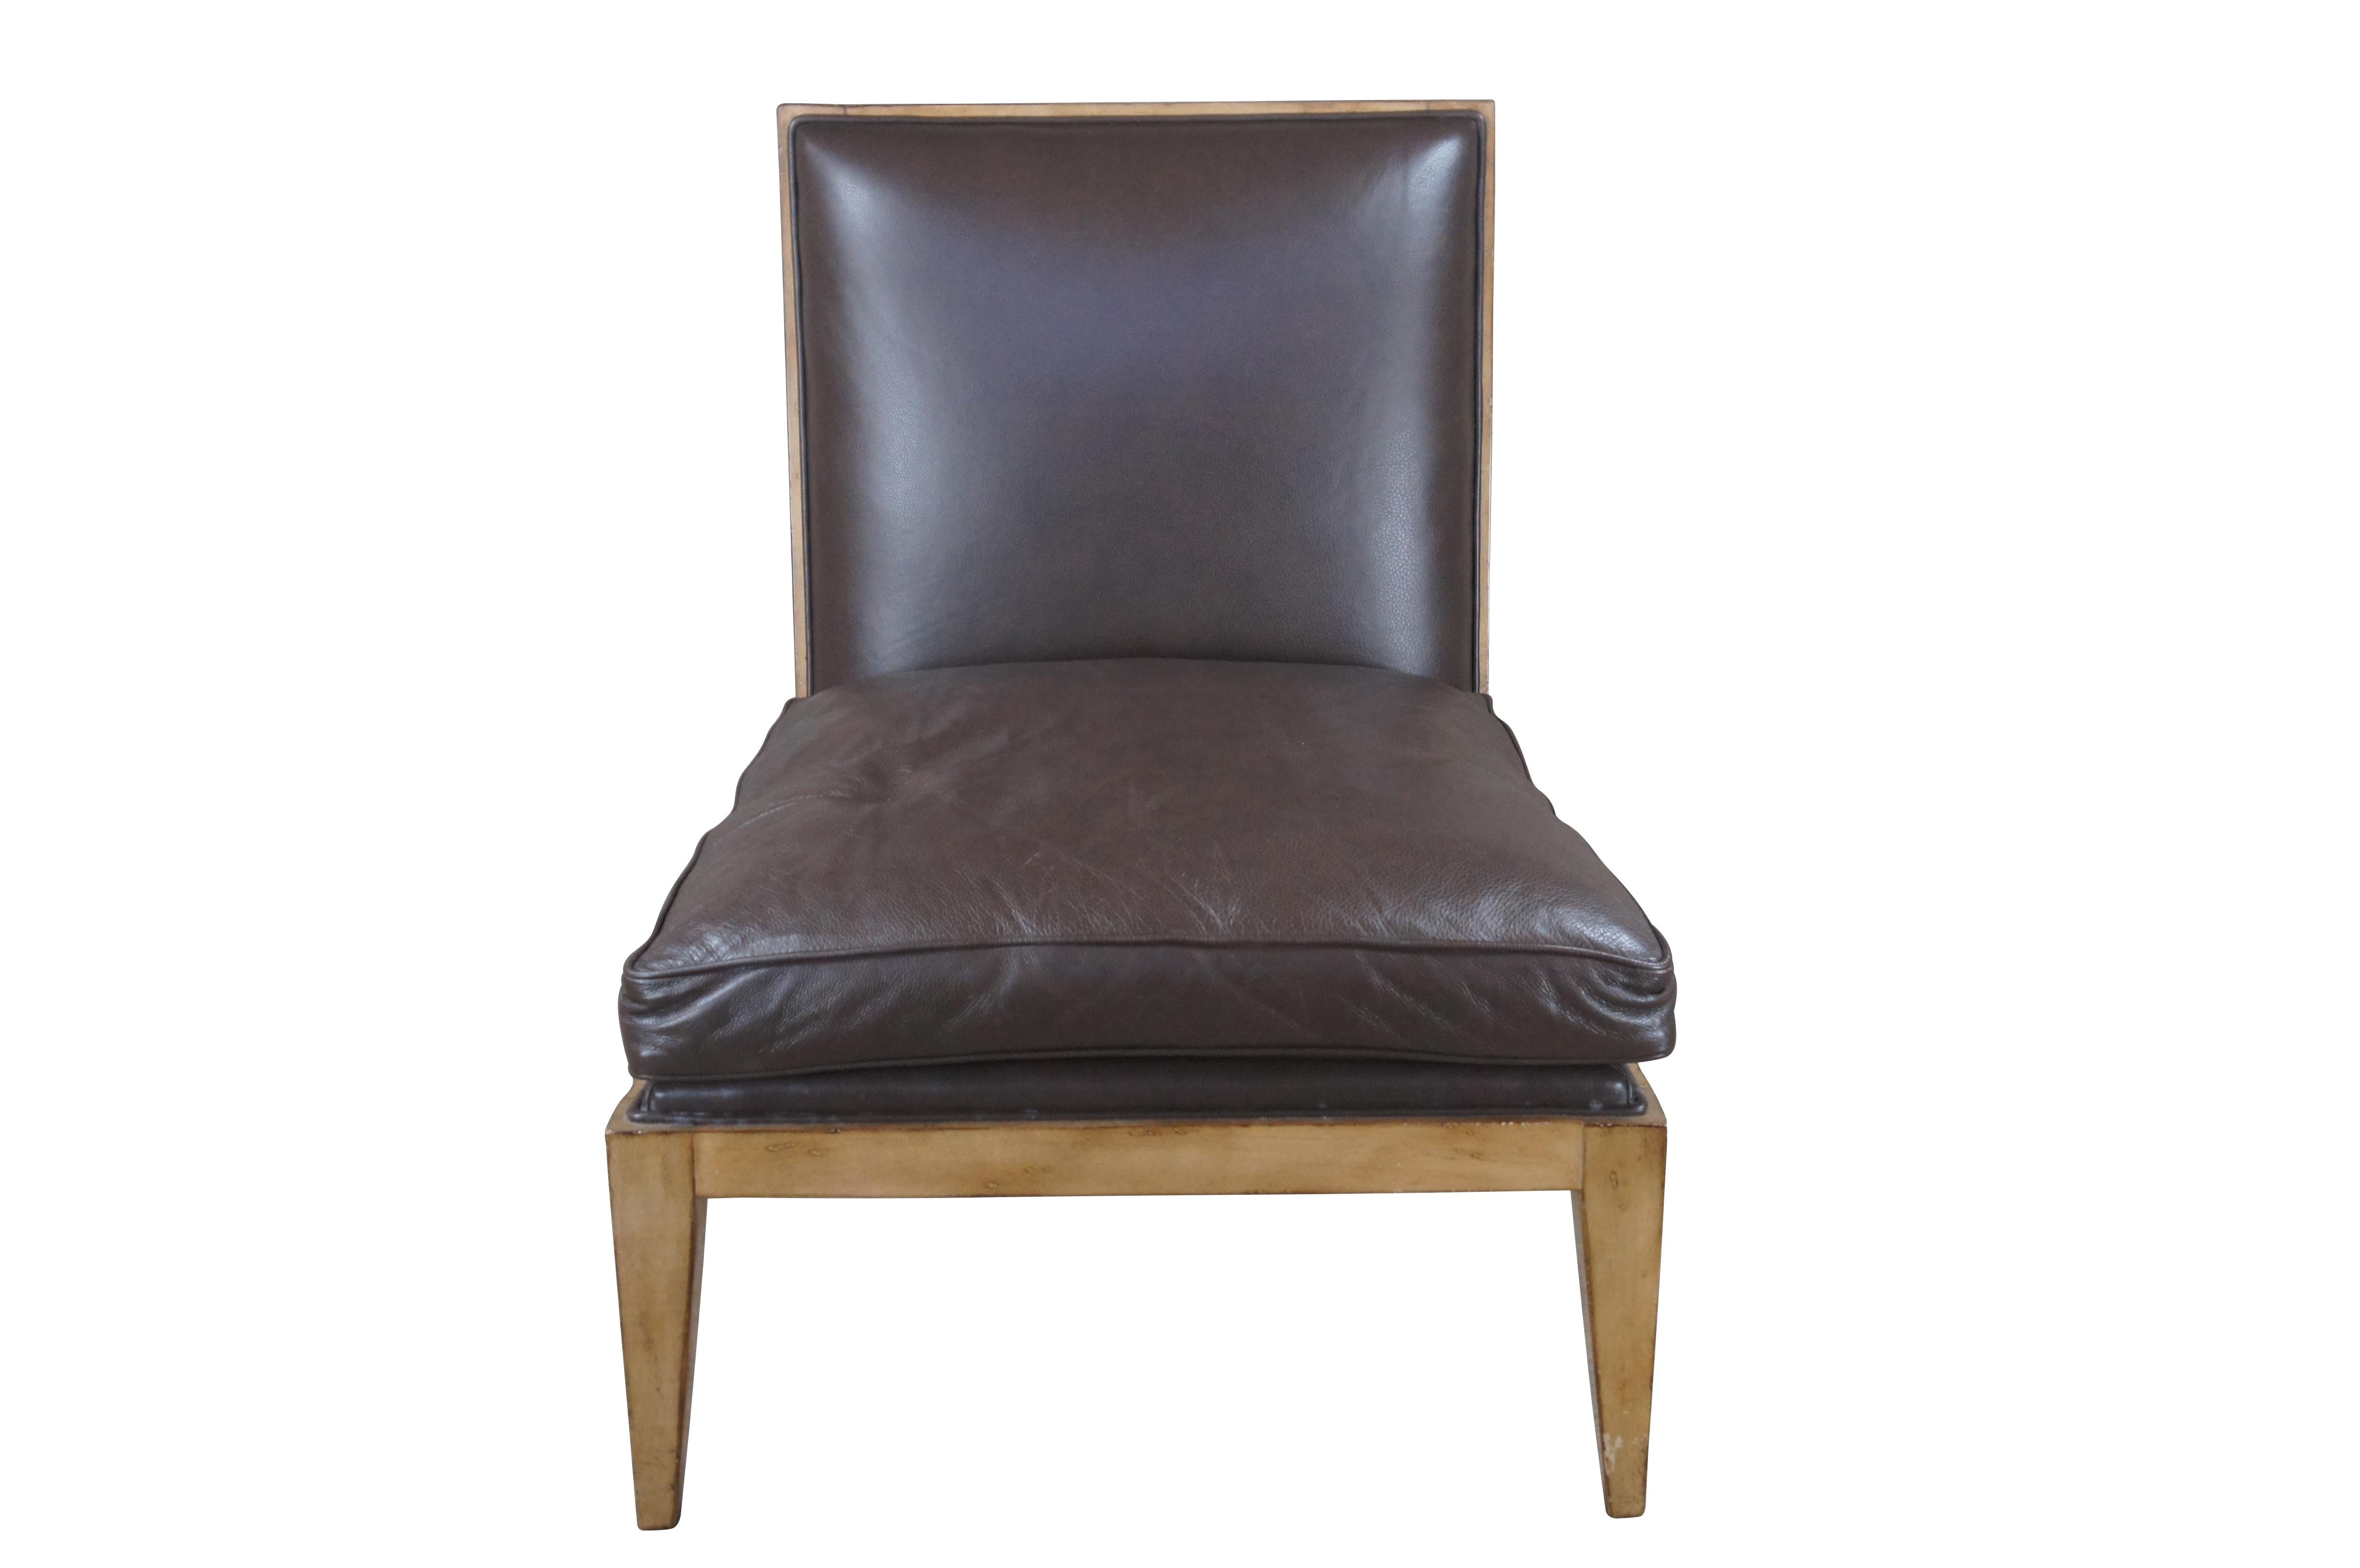 A beautiful armless slipper chair by Swaim Upholstery. Originally made for Marc-Miachaels Interior Design. Features brown leather upholstery and an oak frame. The chair is supported by square tapered legs. A seamless modern design that will make a